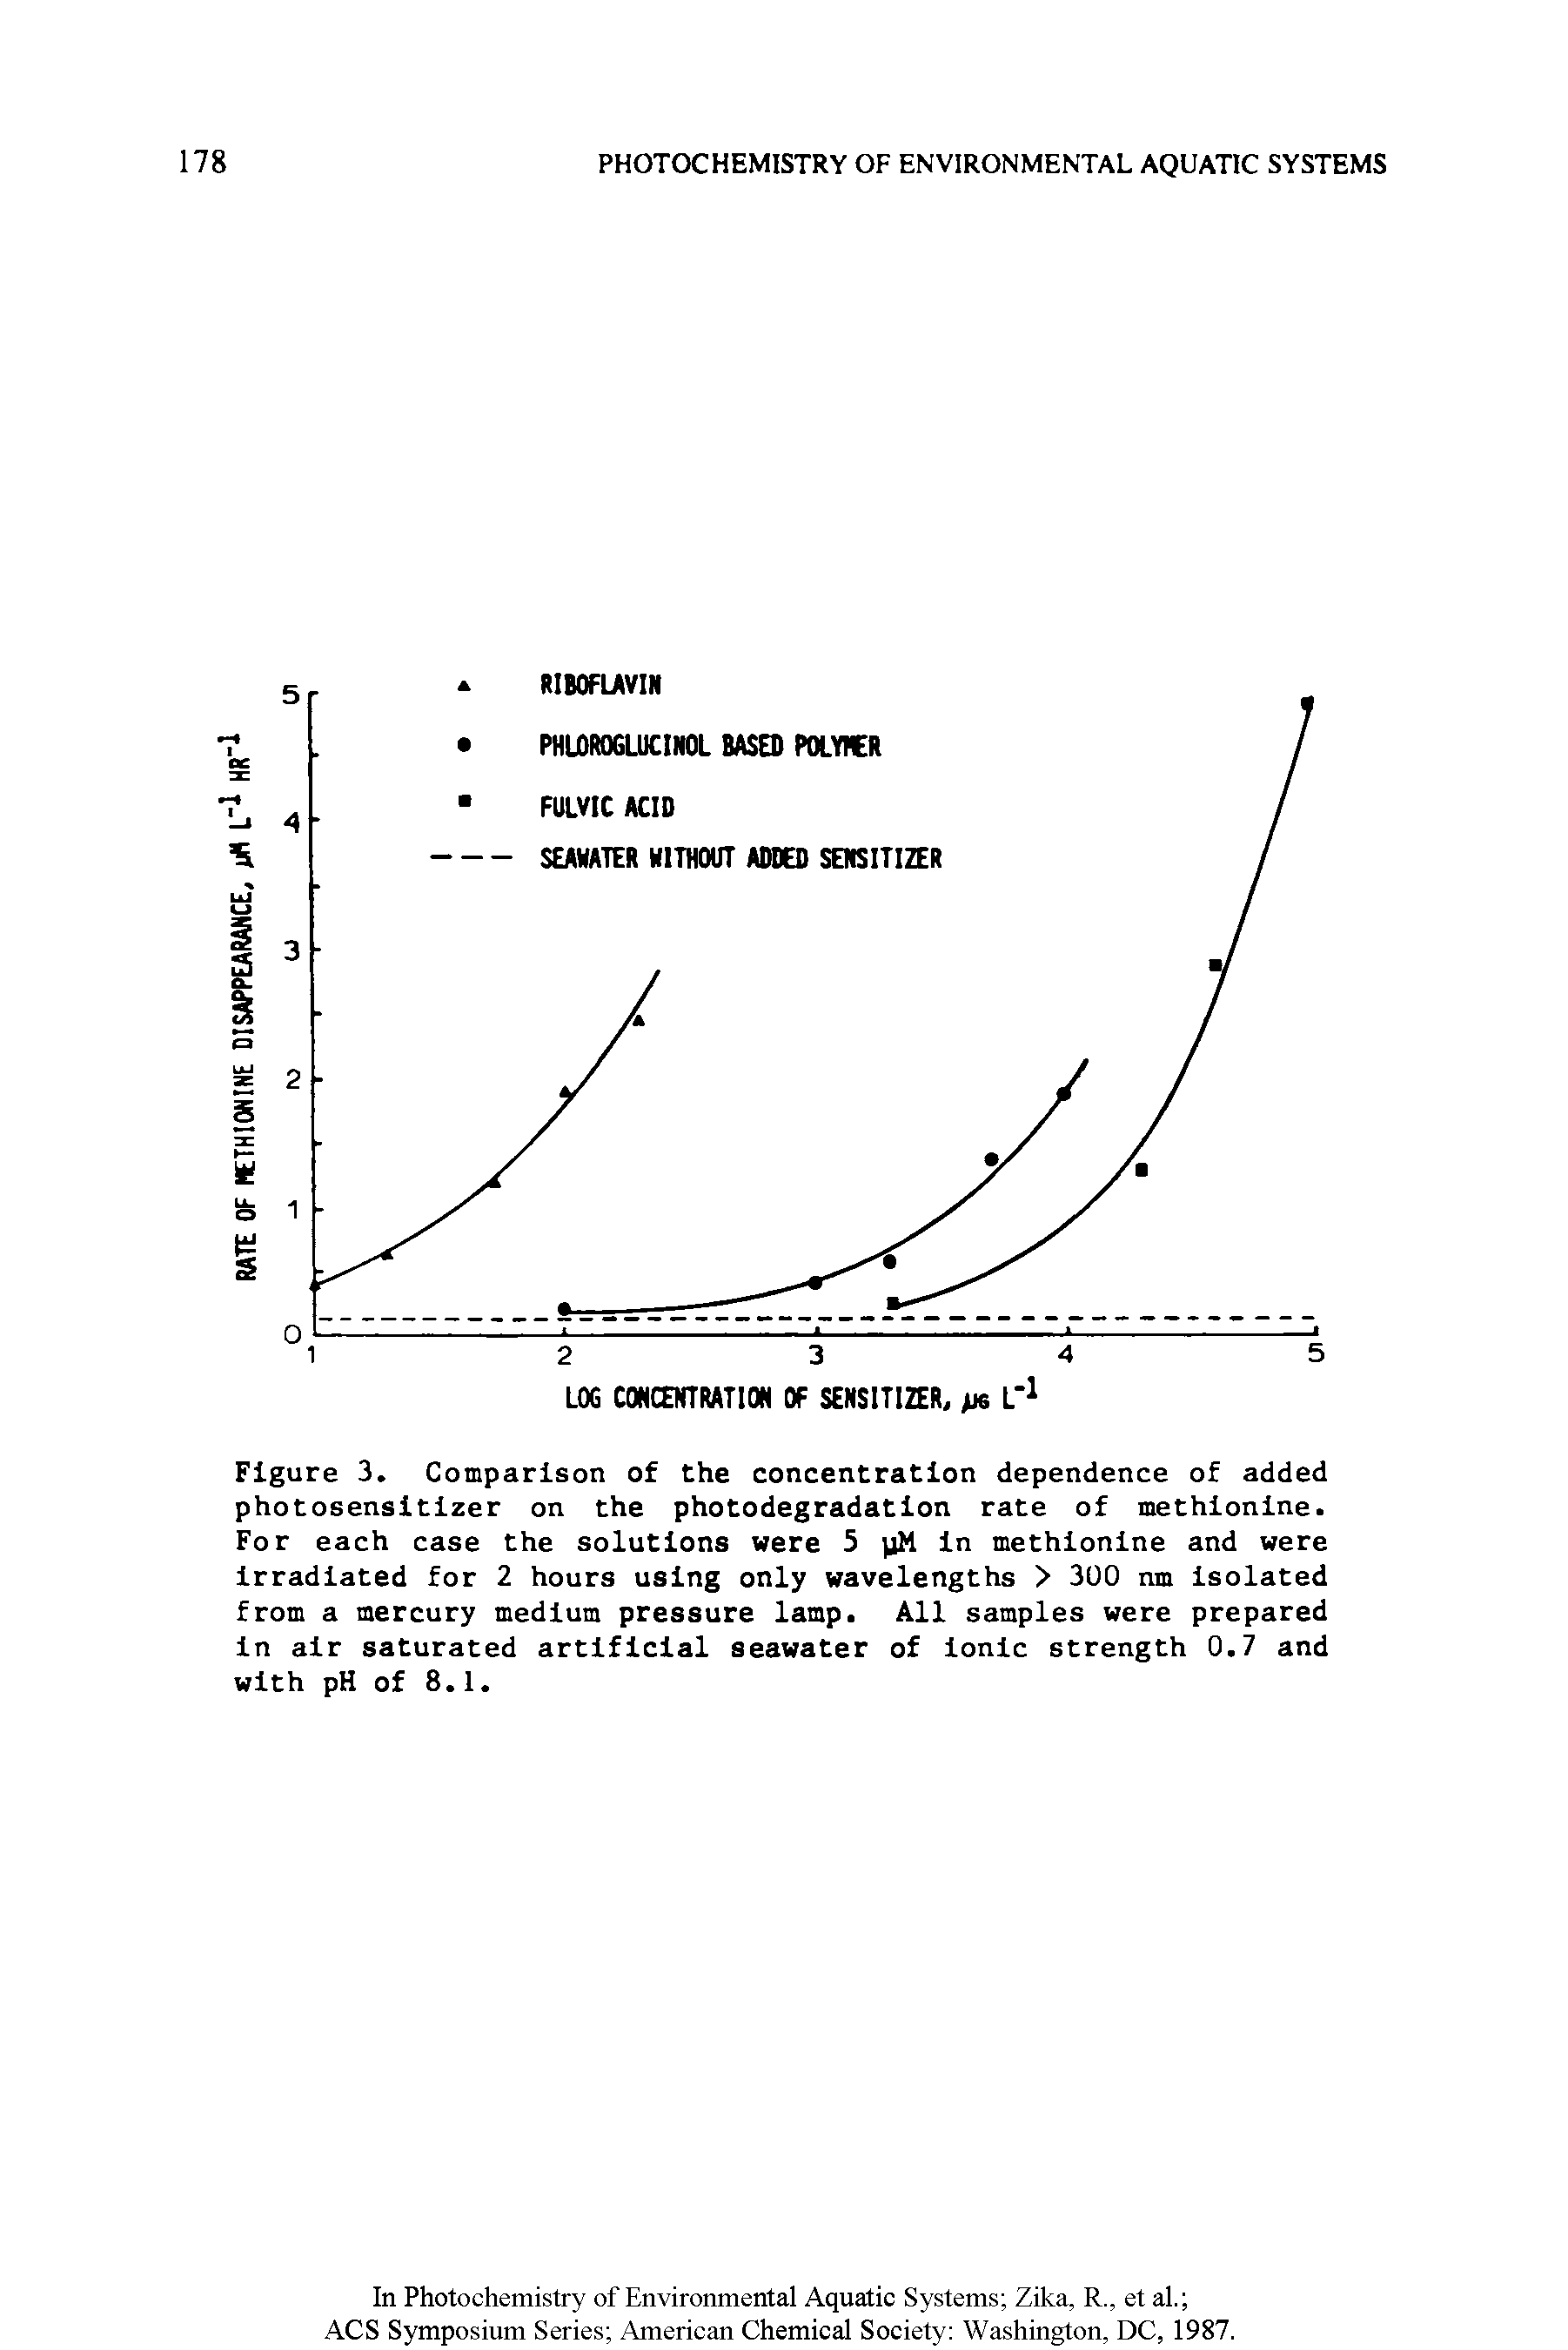 Figure 3. Comparison of the concentration dependence of added photosensitizer on the photodegradation rate of methionine. For each case the solutions were 5 yM in methionine and were Irradiated for 2 hours using only wavelengths > 3U0 nm Isolated from a mercury medium pressure lamp. All samples were prepared In air saturated artificial seawater of ionic strength 0.7 and with pH of 8.1.